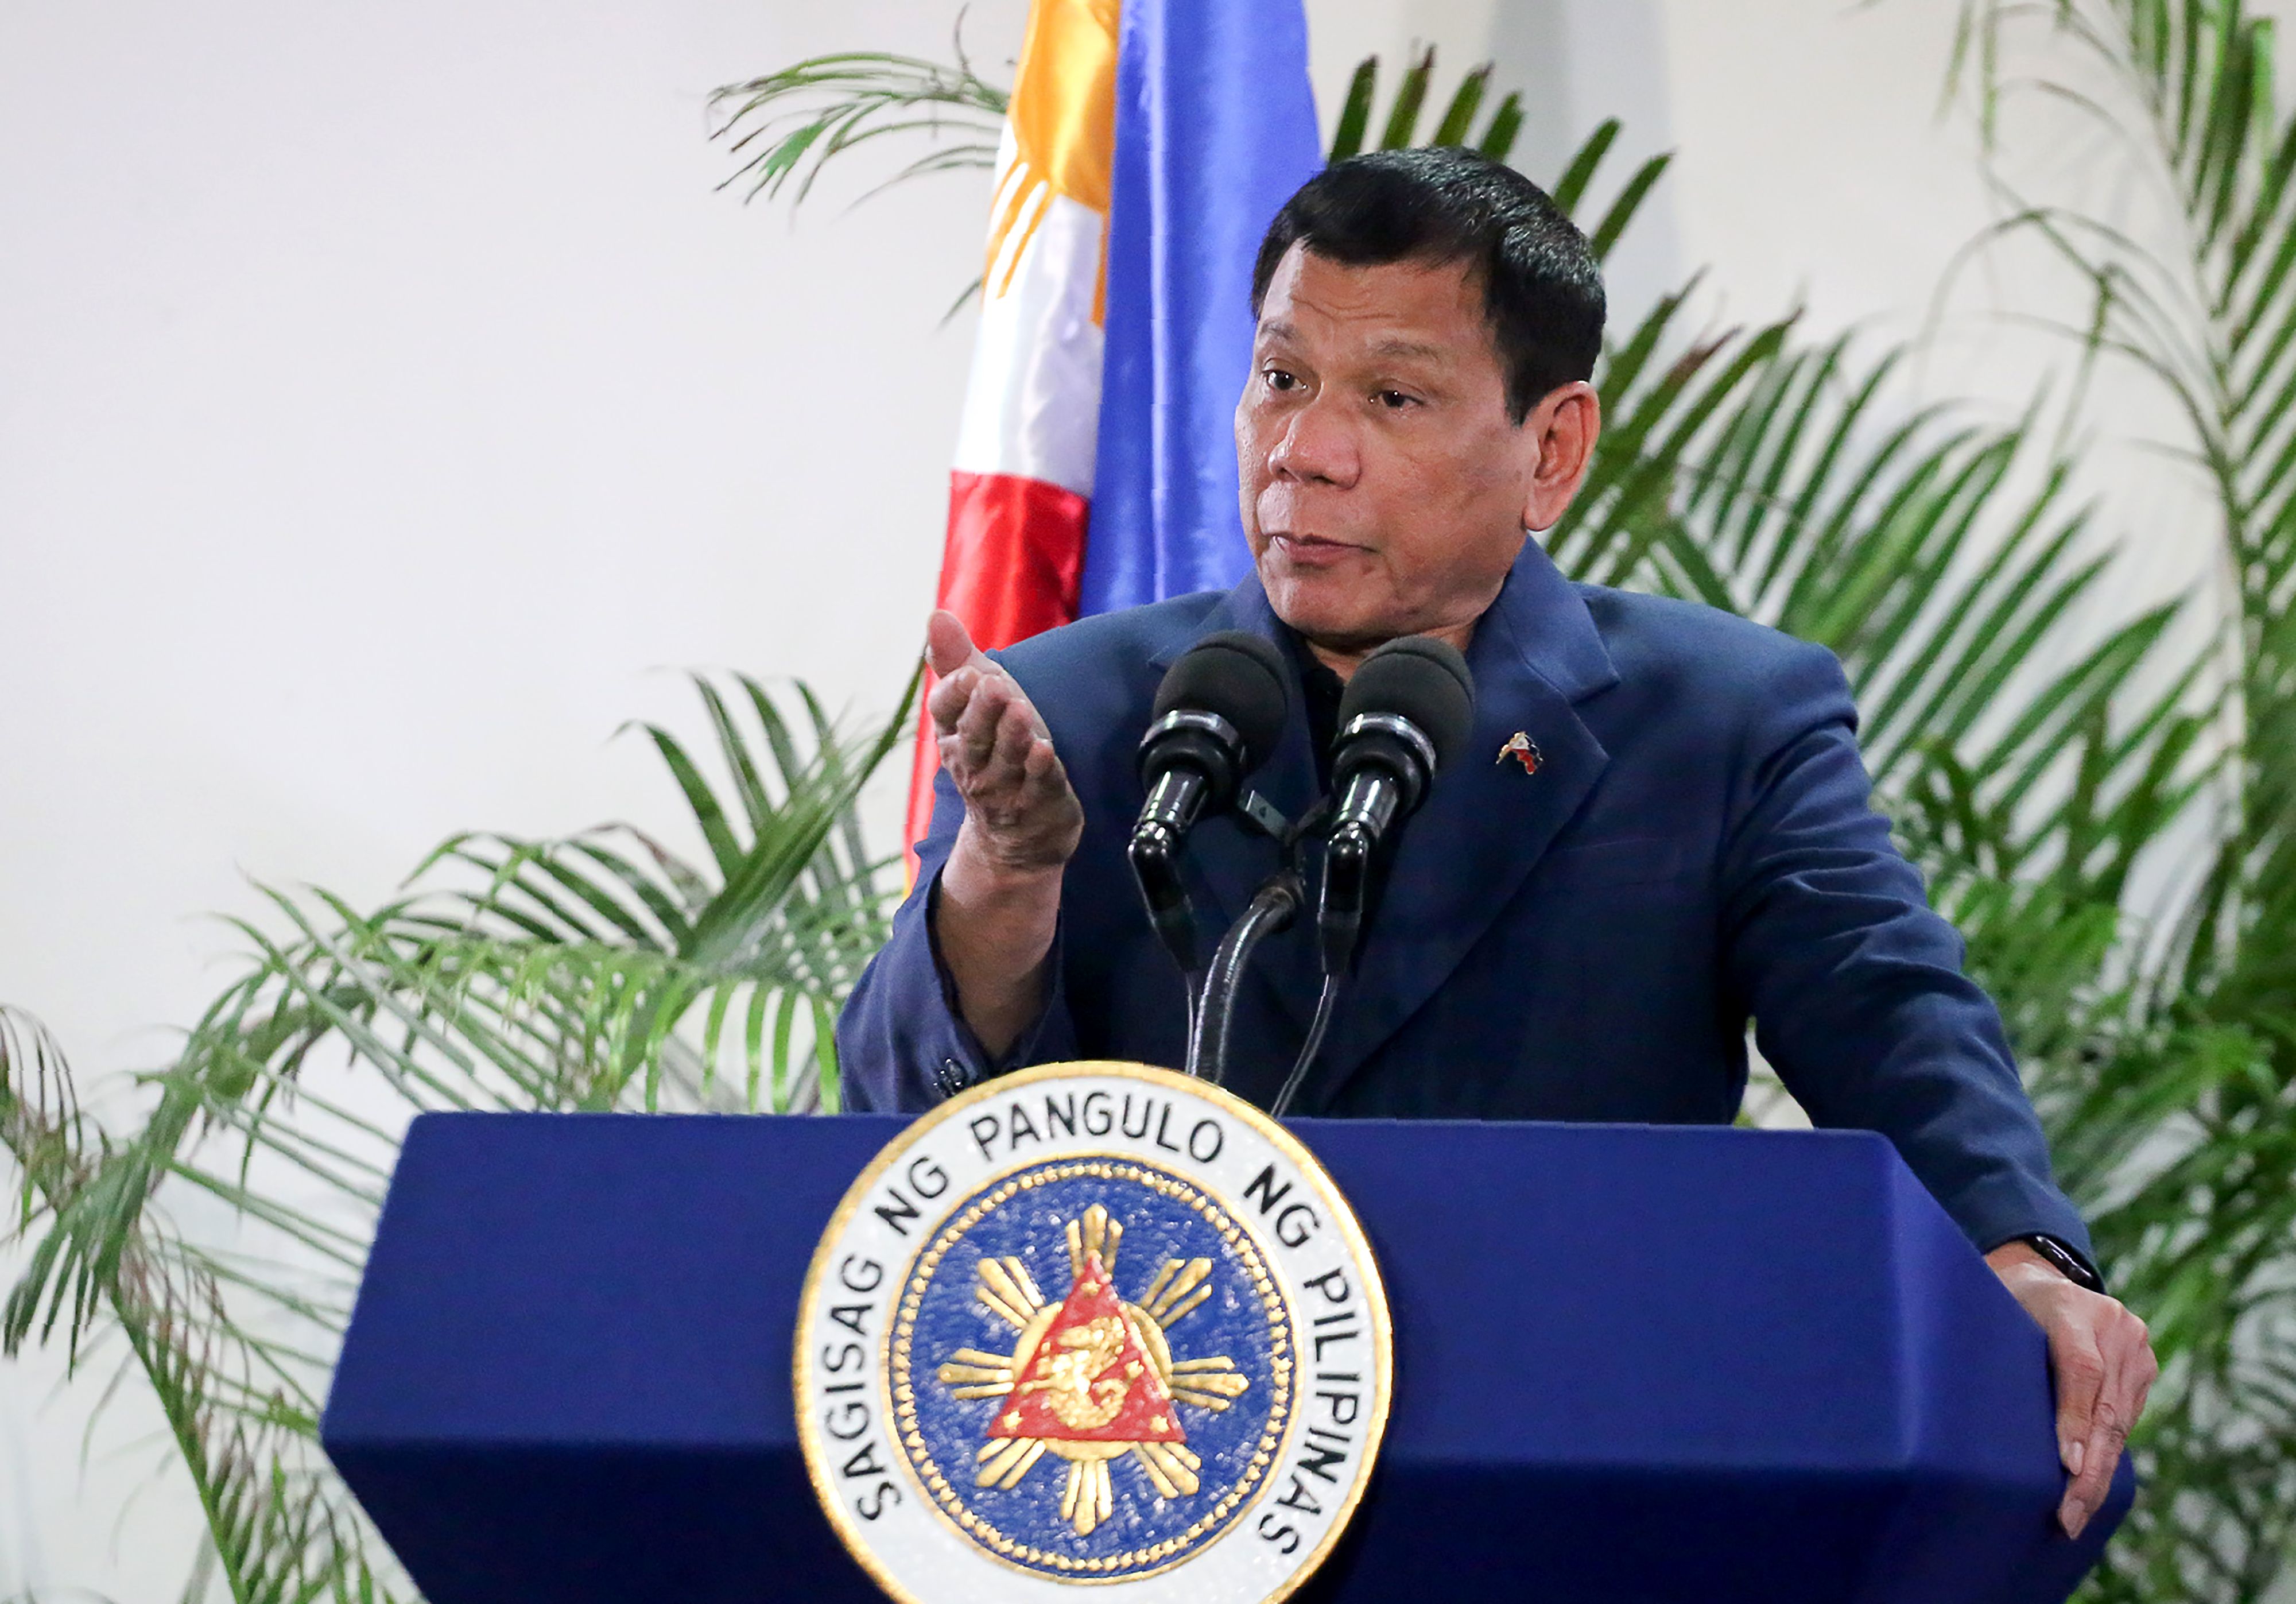 Philippine President Rodrigo Duterte speaks at the Davao International Airport in the Philippine city of Davao after returning from a state visit to Brunei and China on Oct. 22, 2016 (Manman Dejeto—AFP / Getty Images)